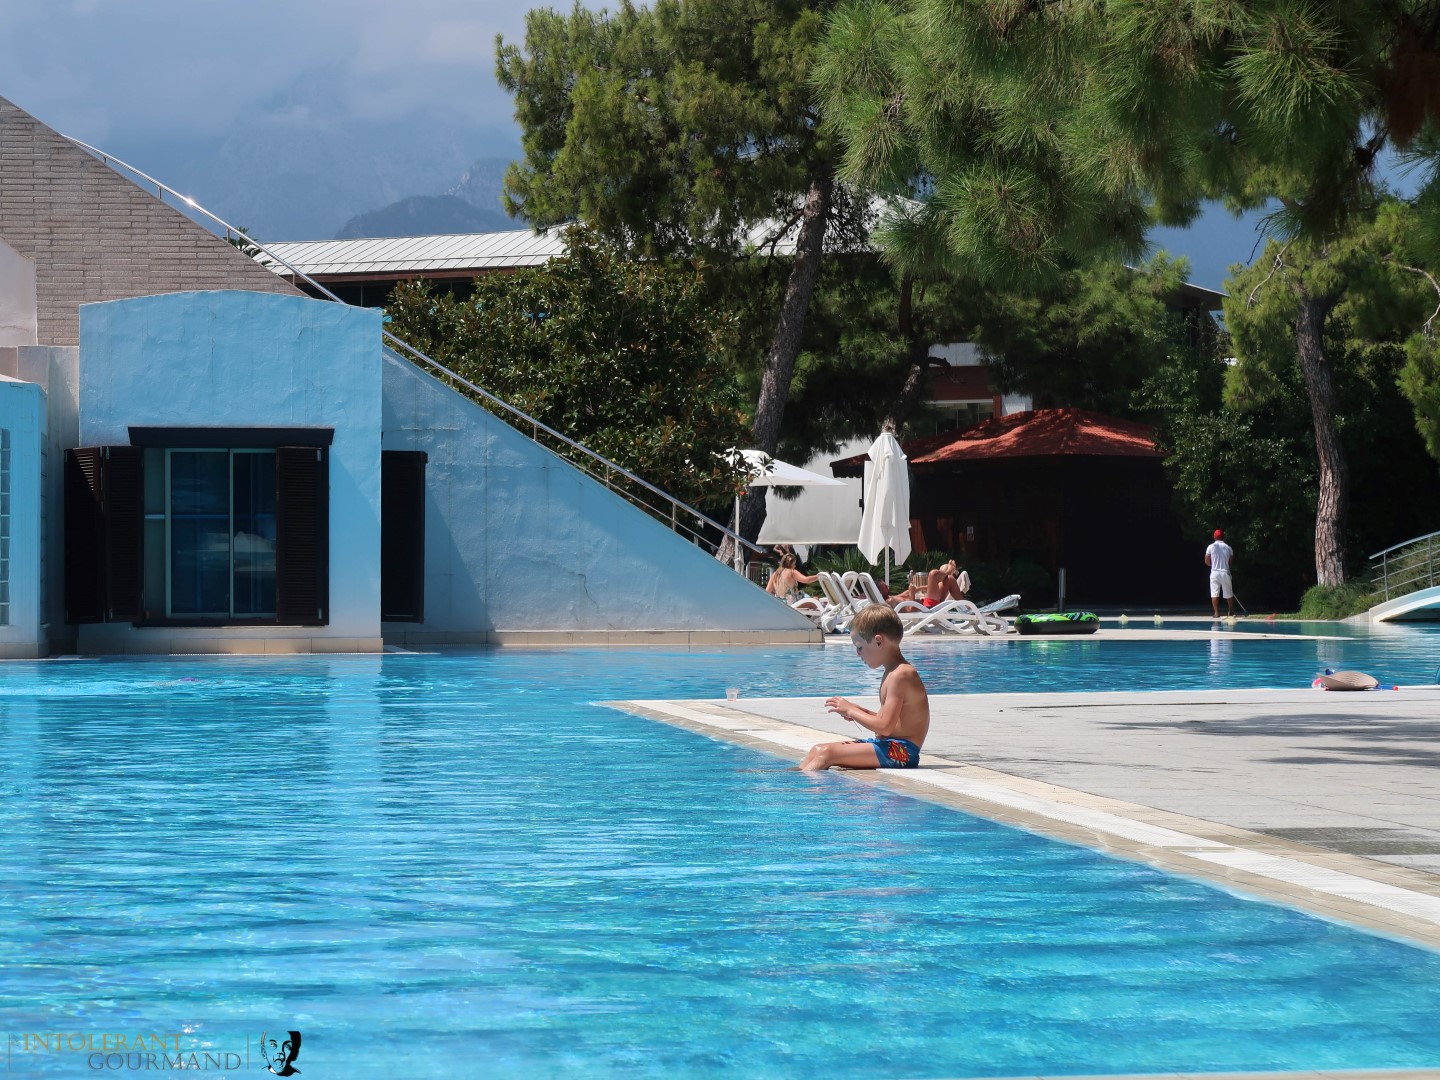 Rixos Sungate Kemer Antalya with Jet 2 Holidays - little boy sat on the side of a quiet swimming pool, contemplating. www.intolerantgourmand.com